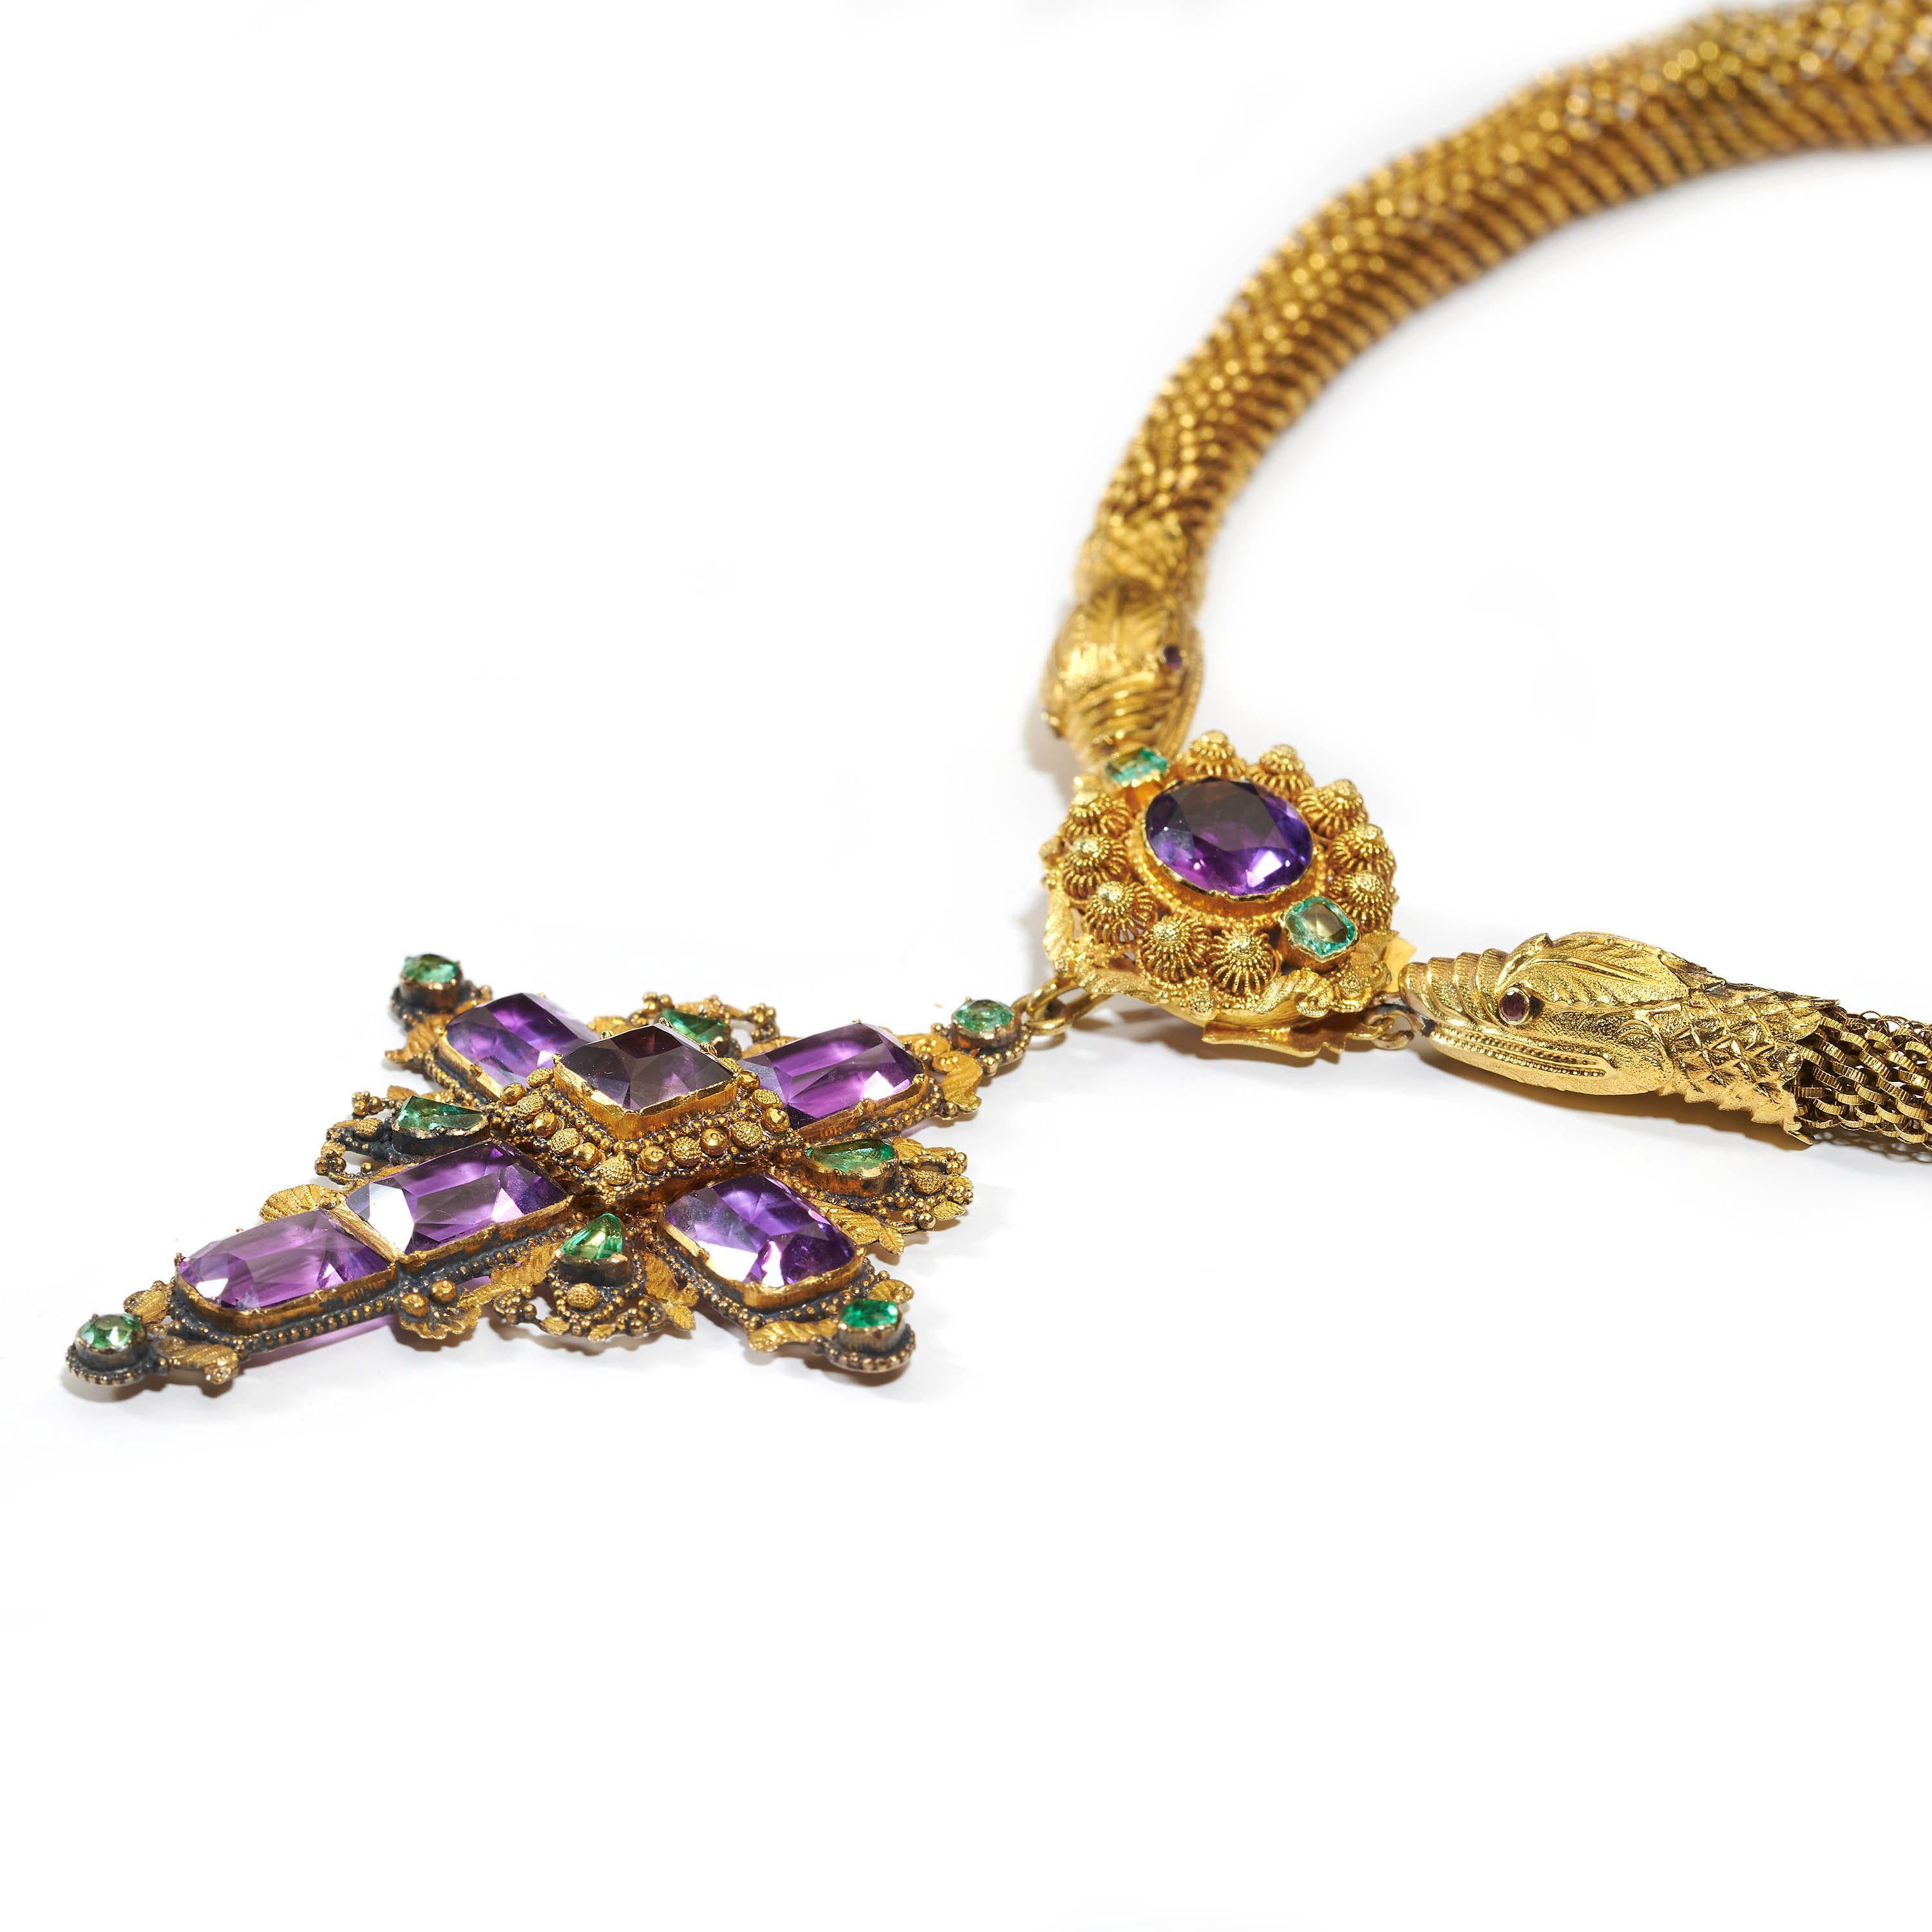 A Georgian cannetille snake necklace, with an amethyst and emerald cross pendant; with the snake chain worked in fine, flexible cannetille wire link work, with embossed snake heads at either end, set with faceted rubies, for the eyes; the snakes are